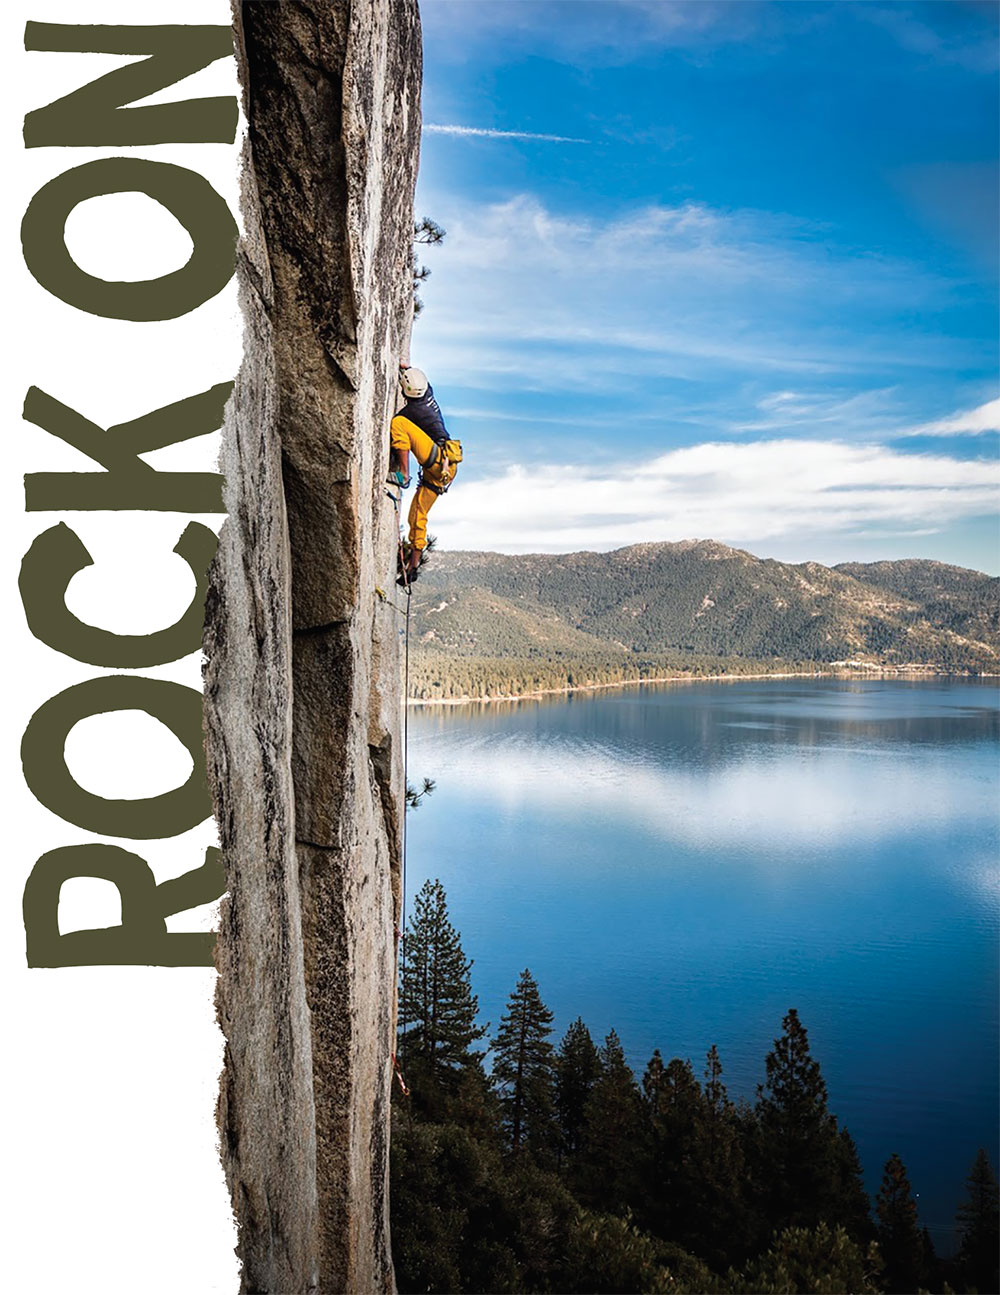 A rock climber scales a vertical rock wall with Lake Tahoe in the background